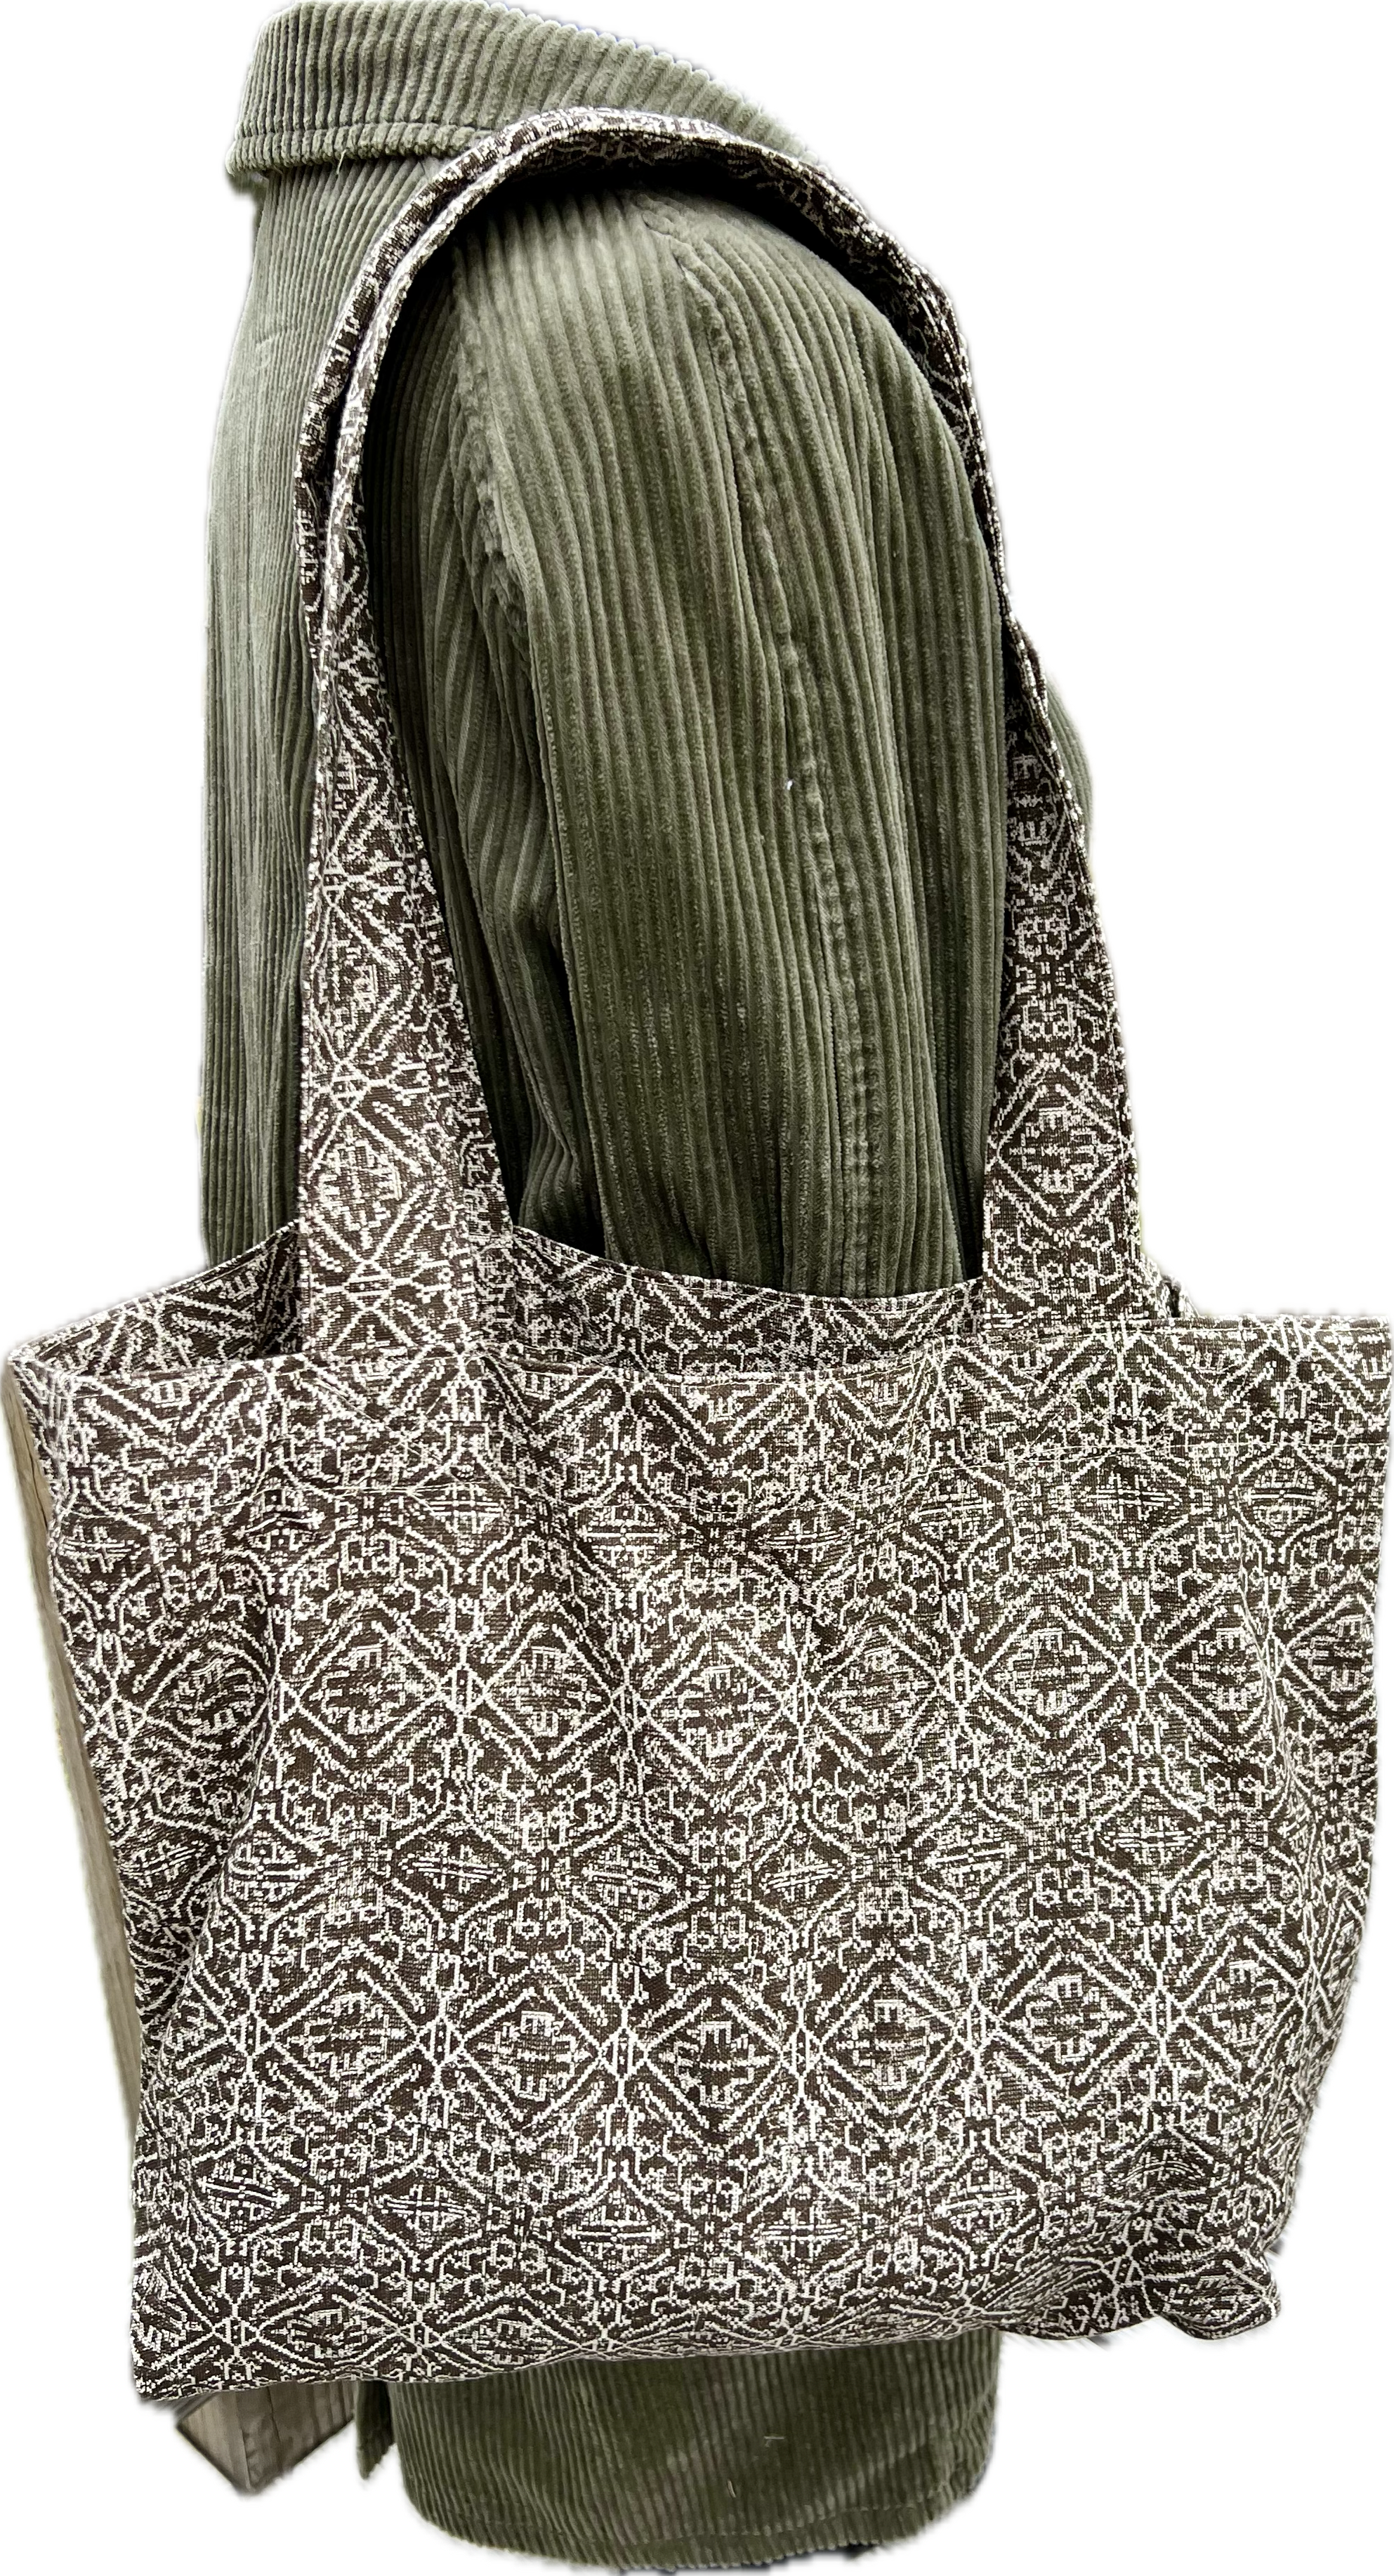 Market Grocery Tote Bag Beige and Brown